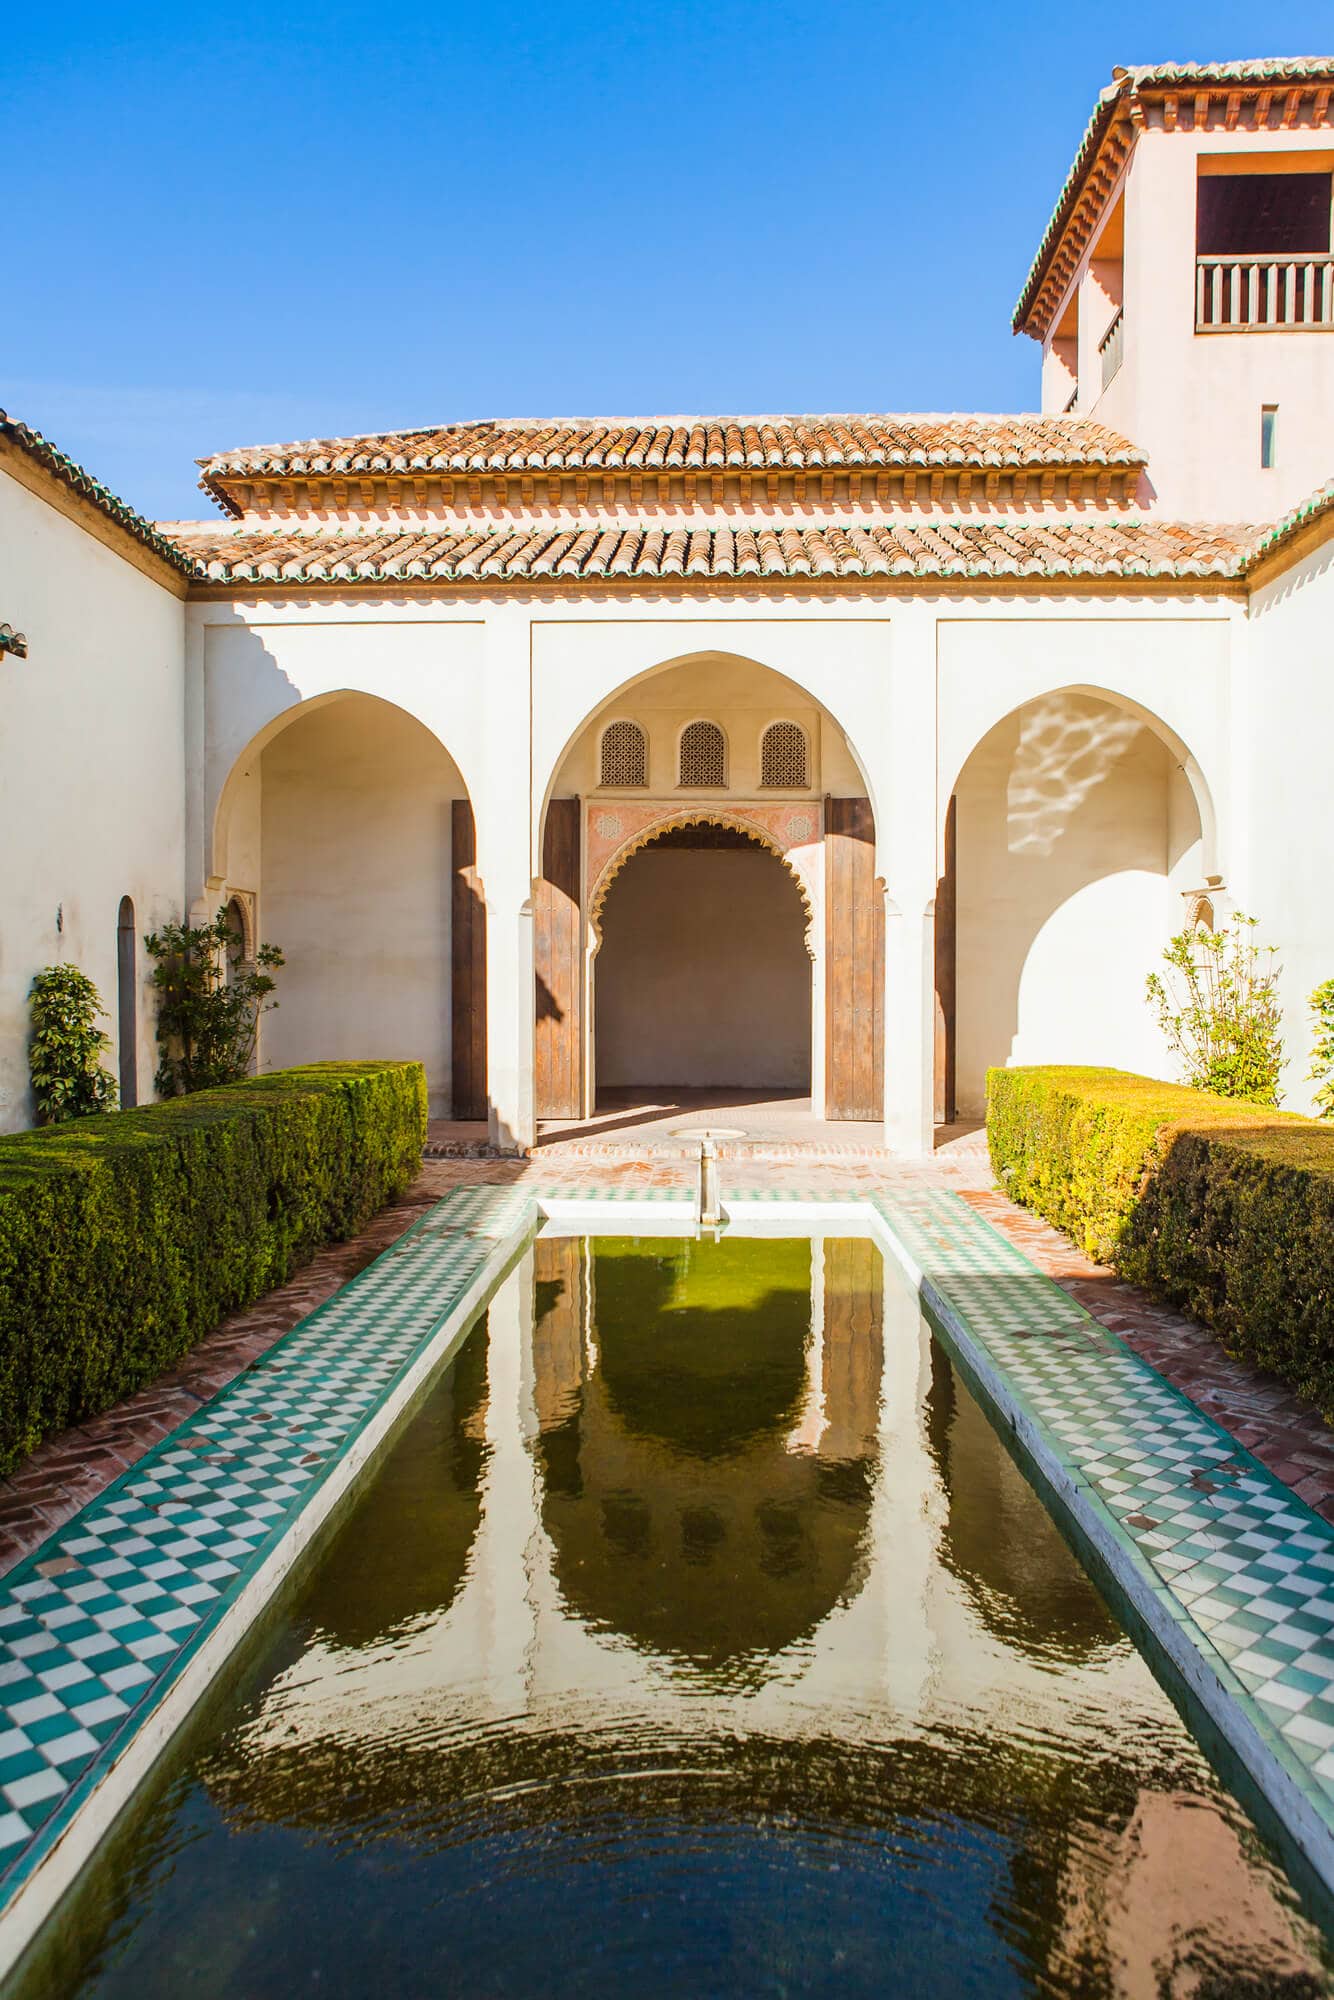 A typical Moorish courtyard set around a rectangular pool surrounded by green tiles and manicured hedges with arches mirroring in the water, inside the Alcazaba in Malaga's Old Town.